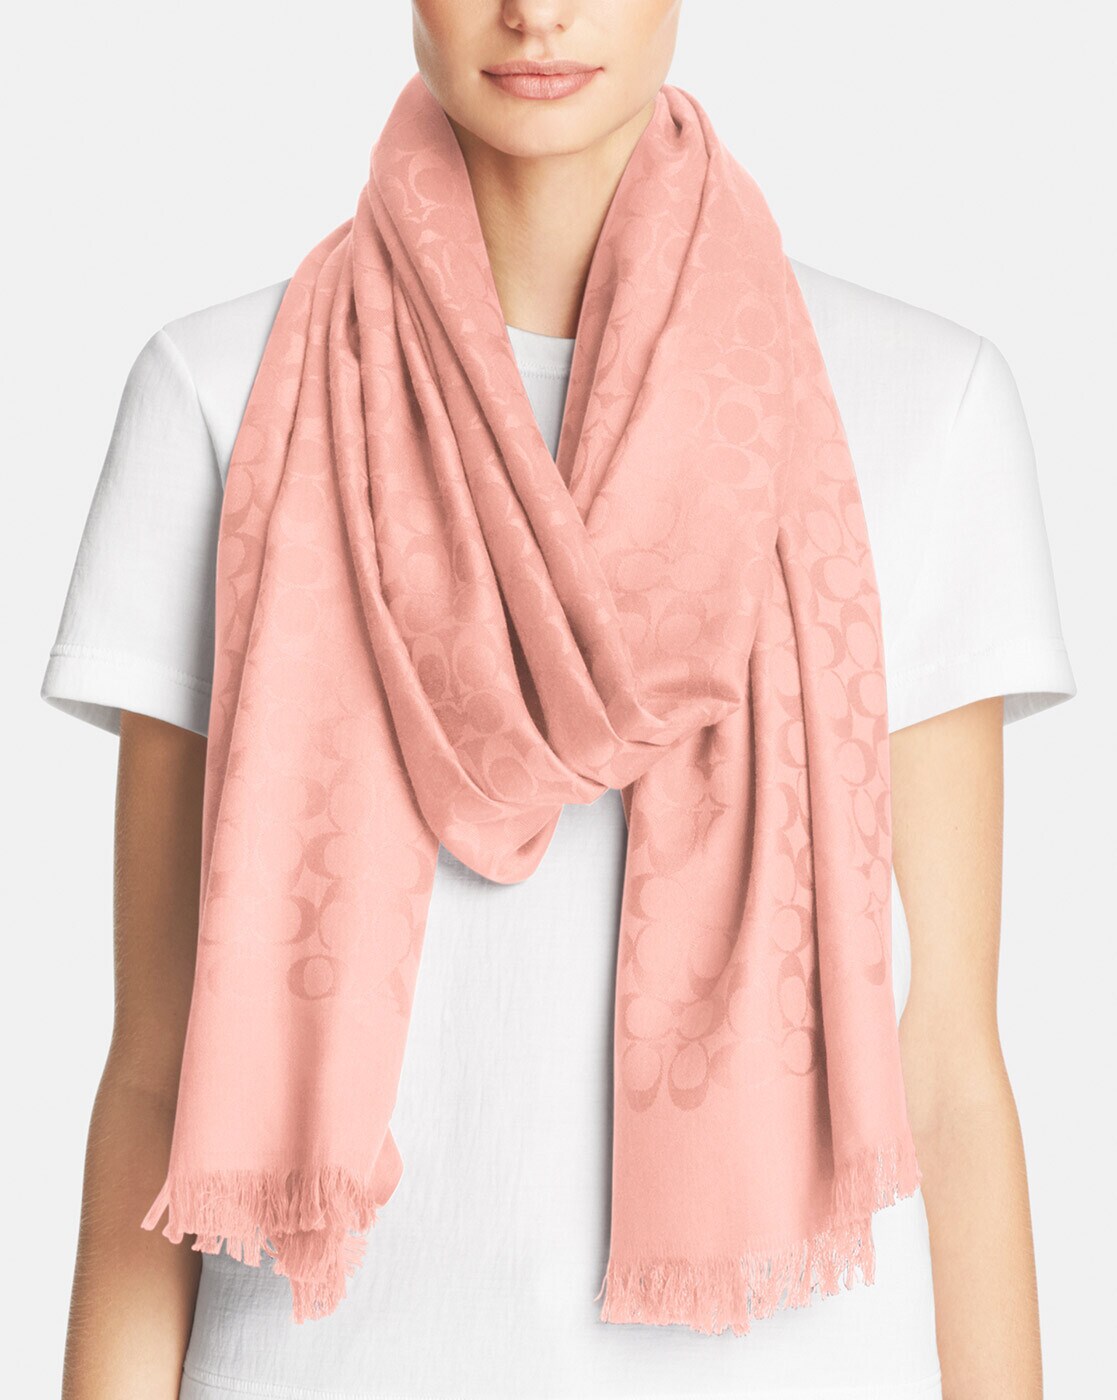 KHĂN QUẤN CỔ COACH BLUSH SIGNATURE TEXTURED STOLE WITH TASSELS 3